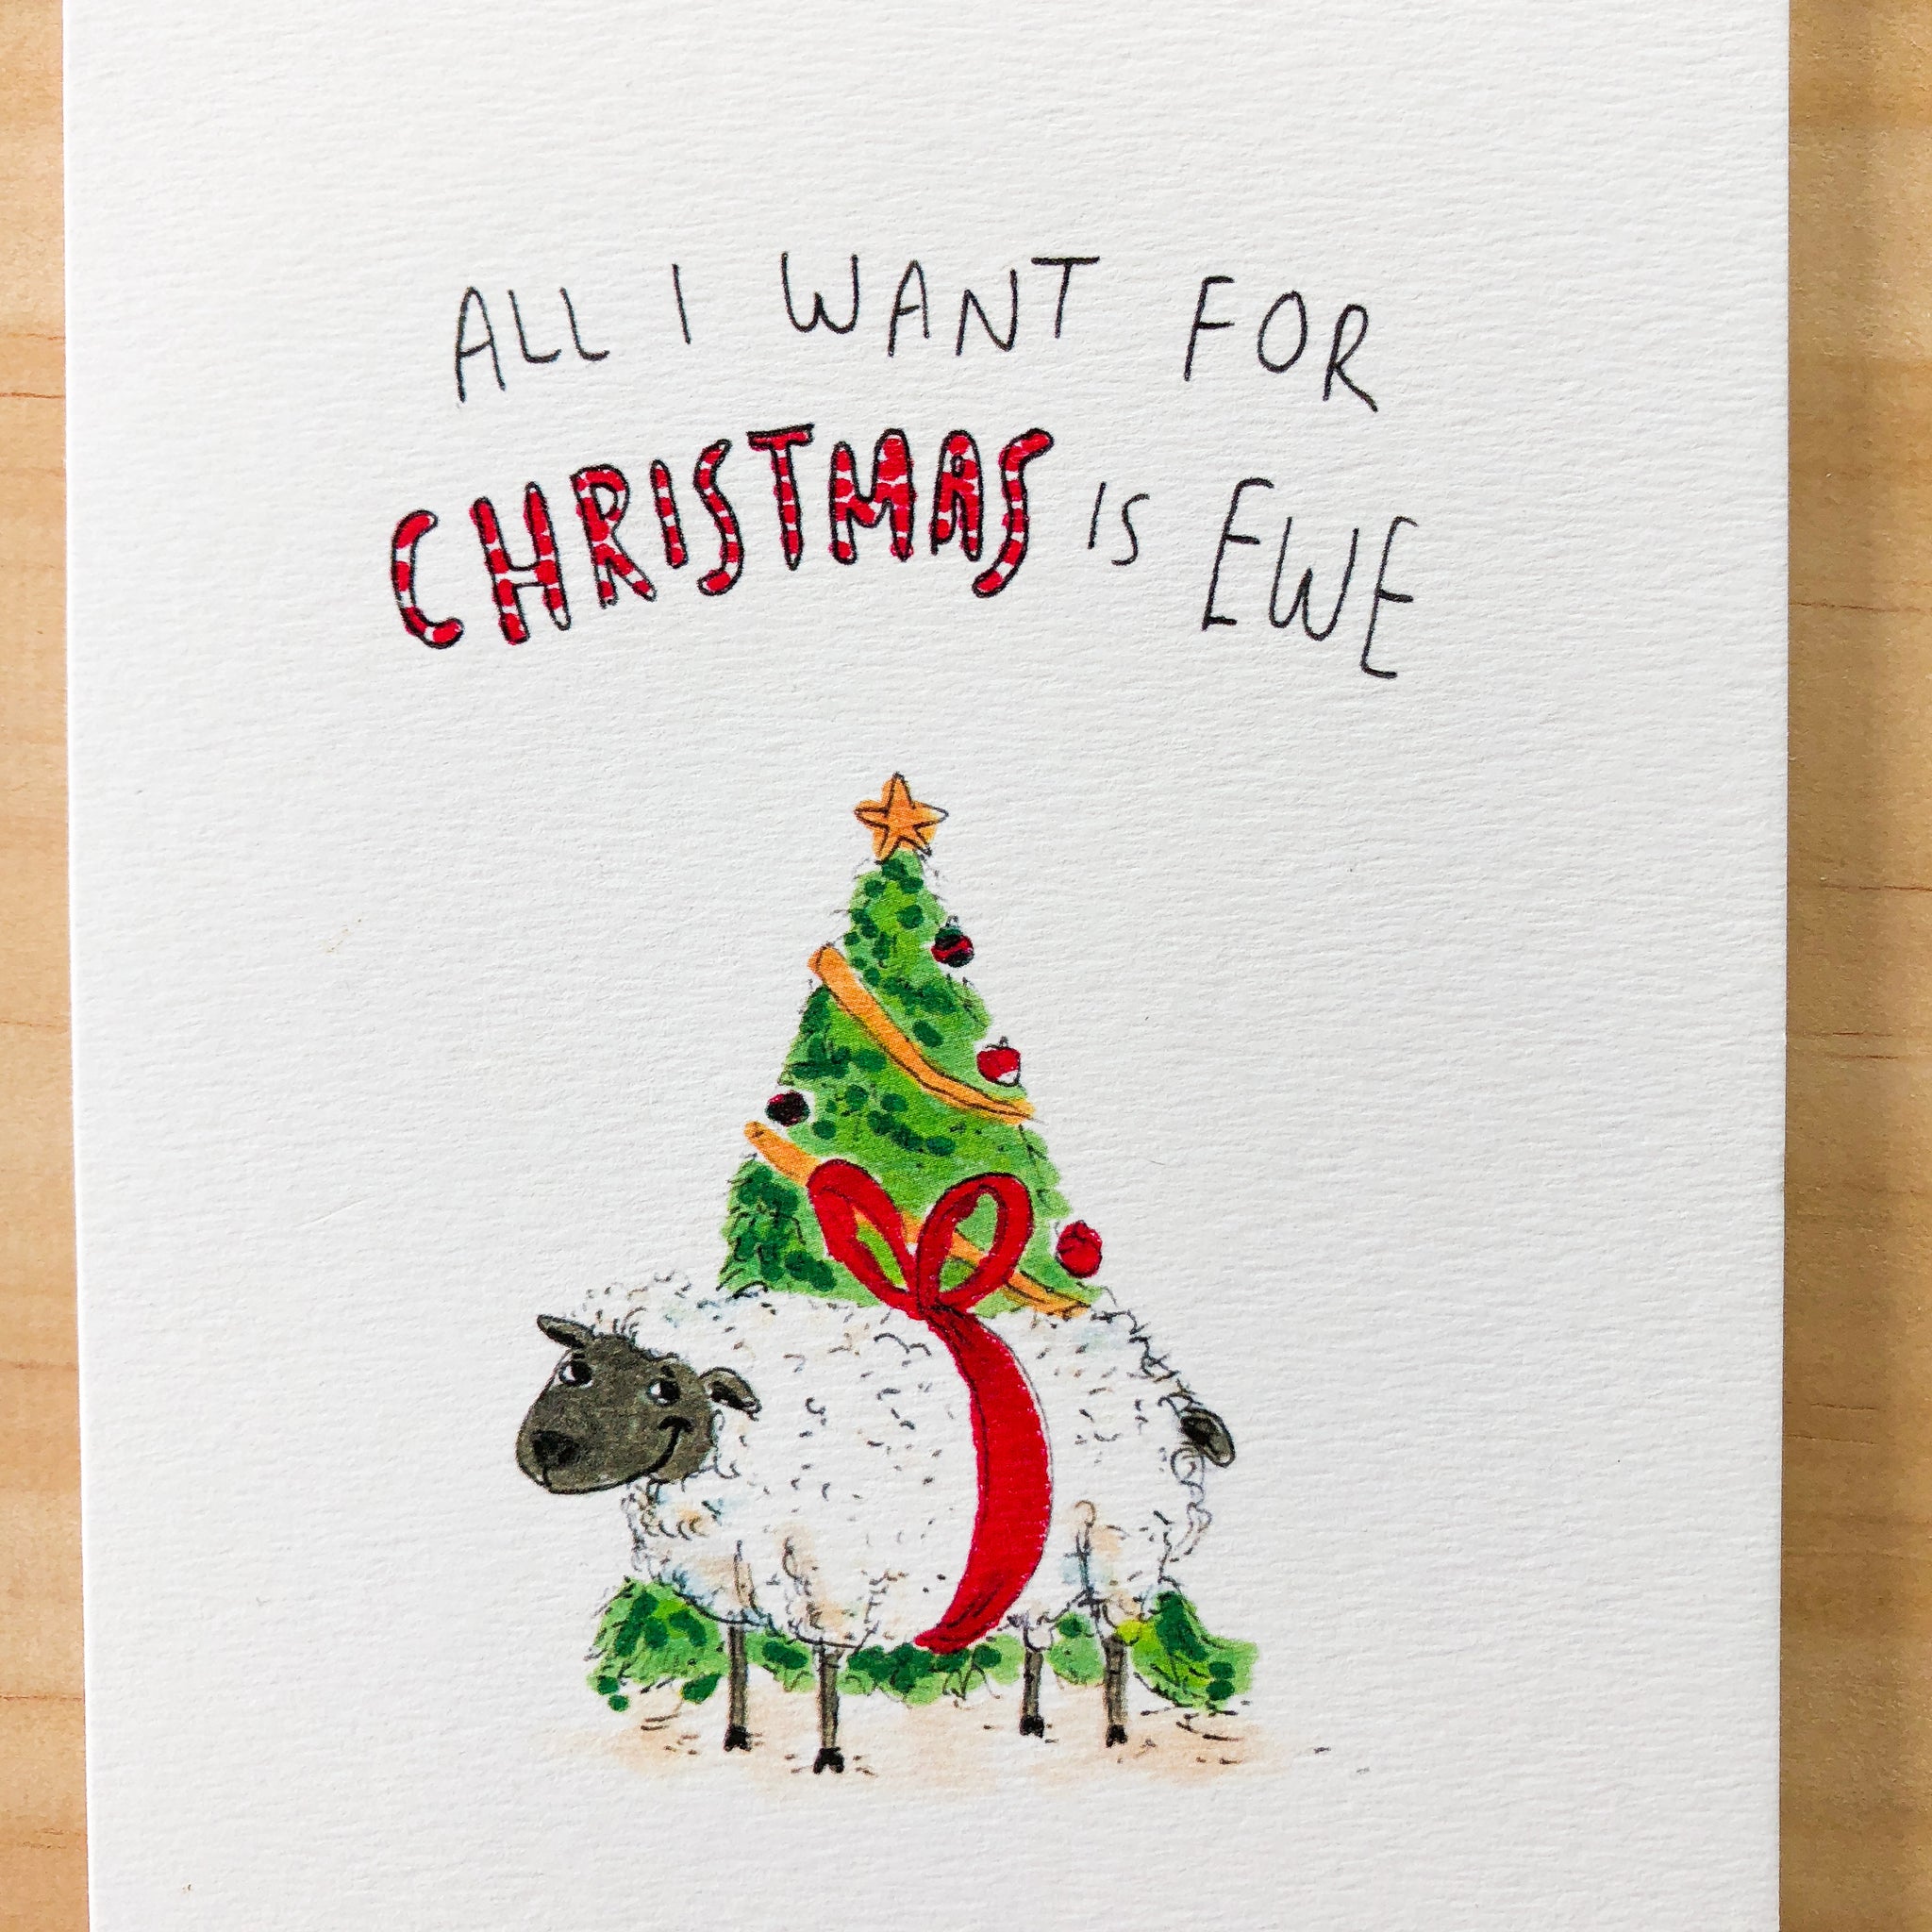 All I Want For Christmas is Ewe - Well Drawn